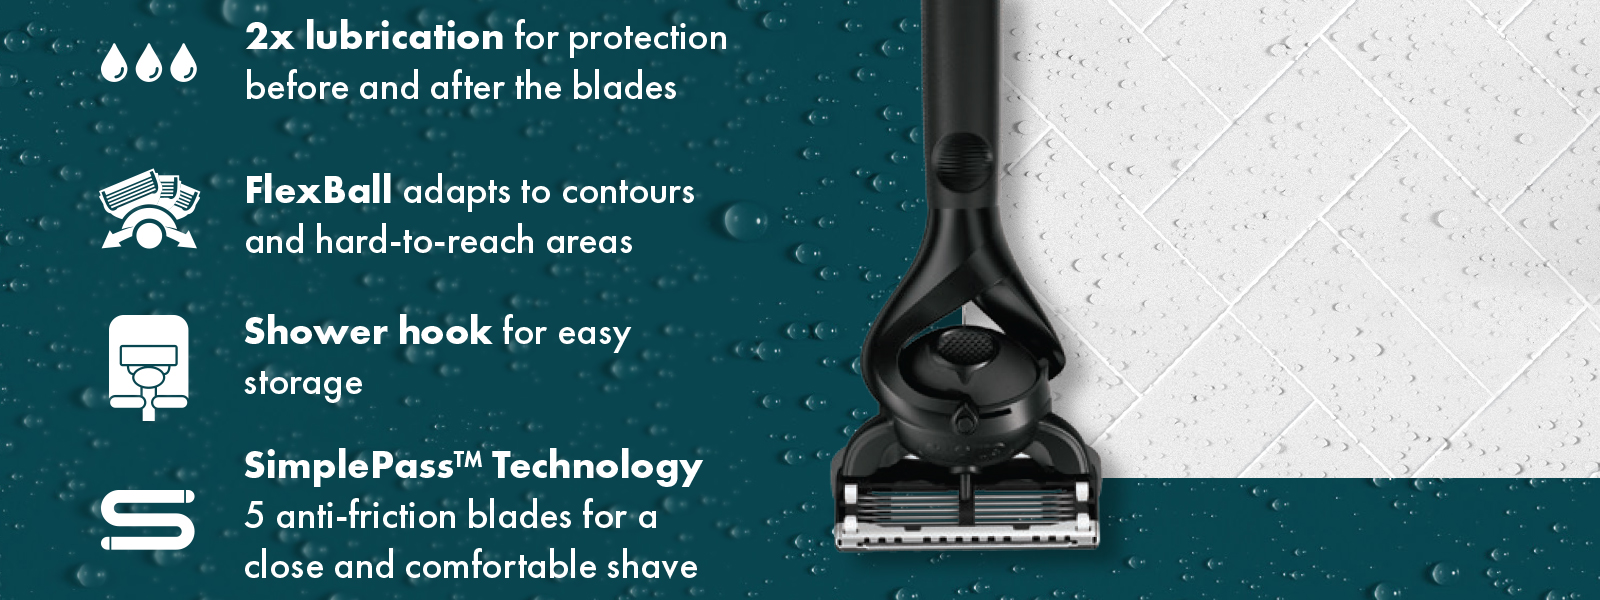 x2 lubrication for protection, before and after the blades. Flex ball adapts to contours and hard-to-reach areas. Shower hook for easy storage. Simple pass for TMTechnology 5 anti-friction blades for a close and comfortable shave.